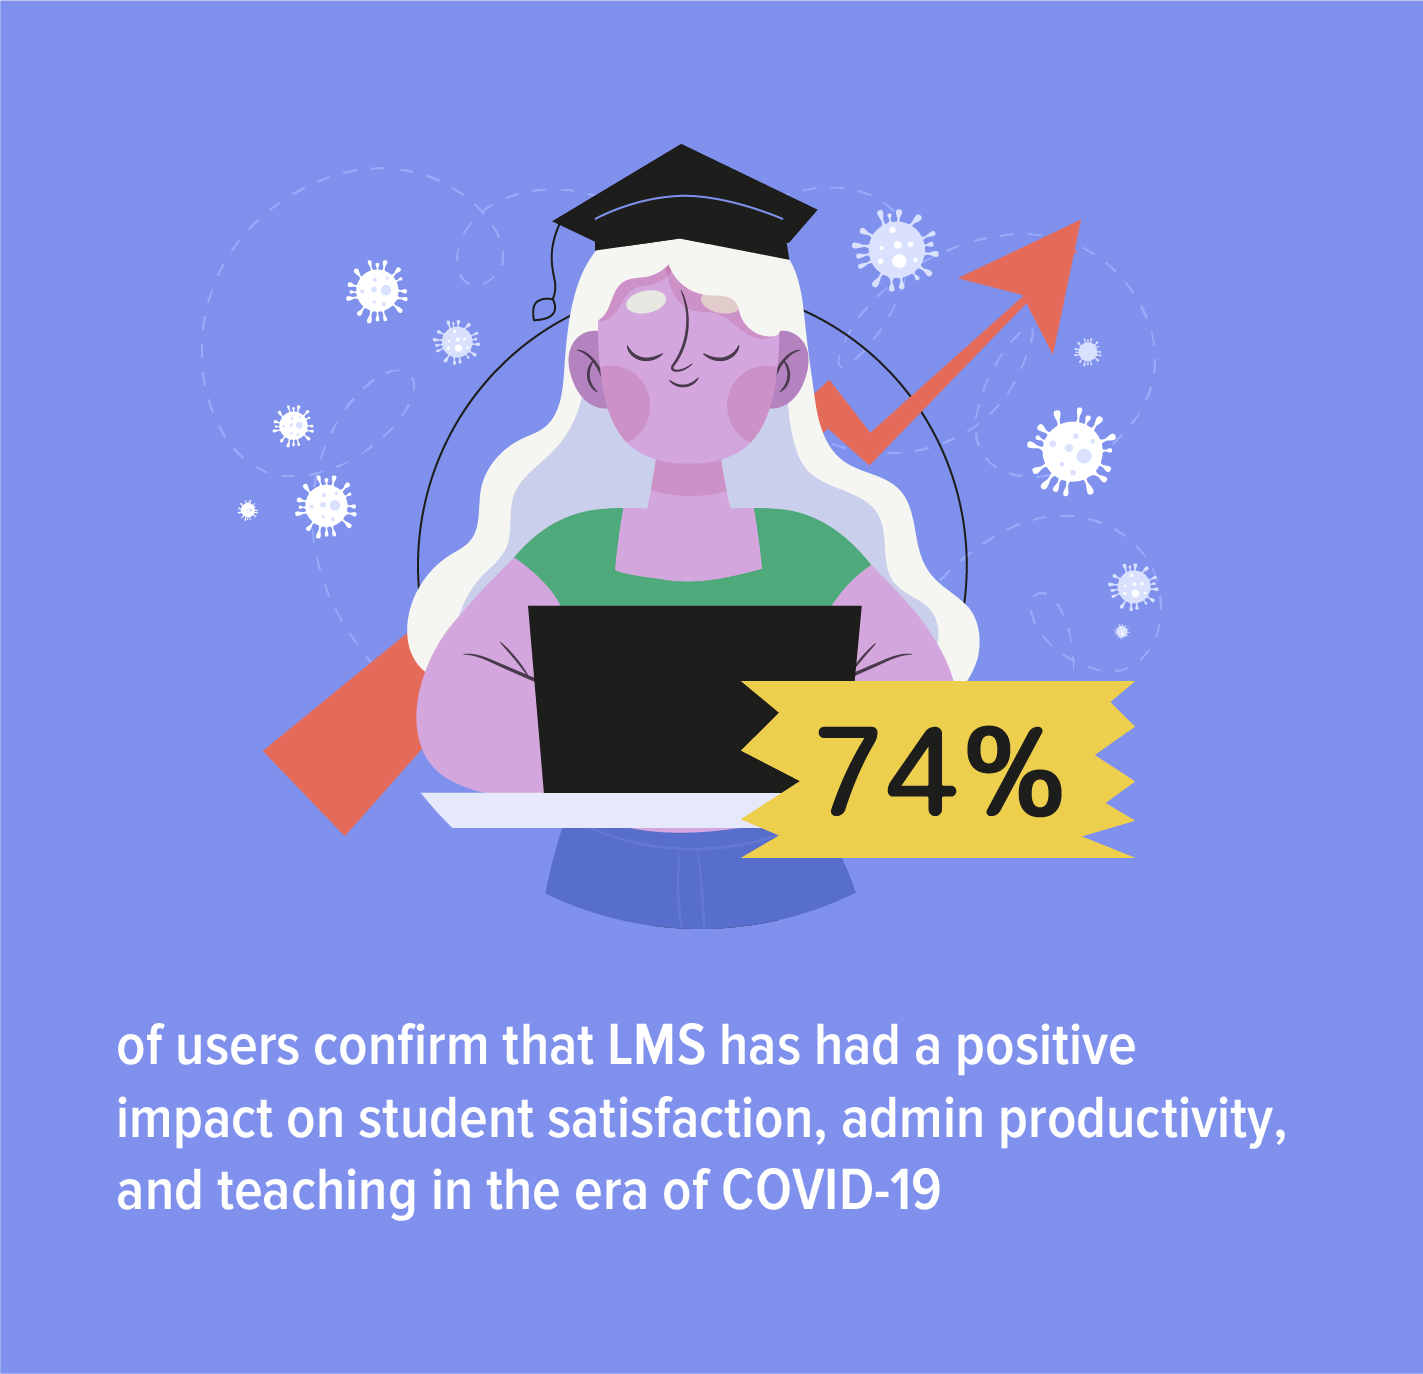 LMS plays a vital part in education